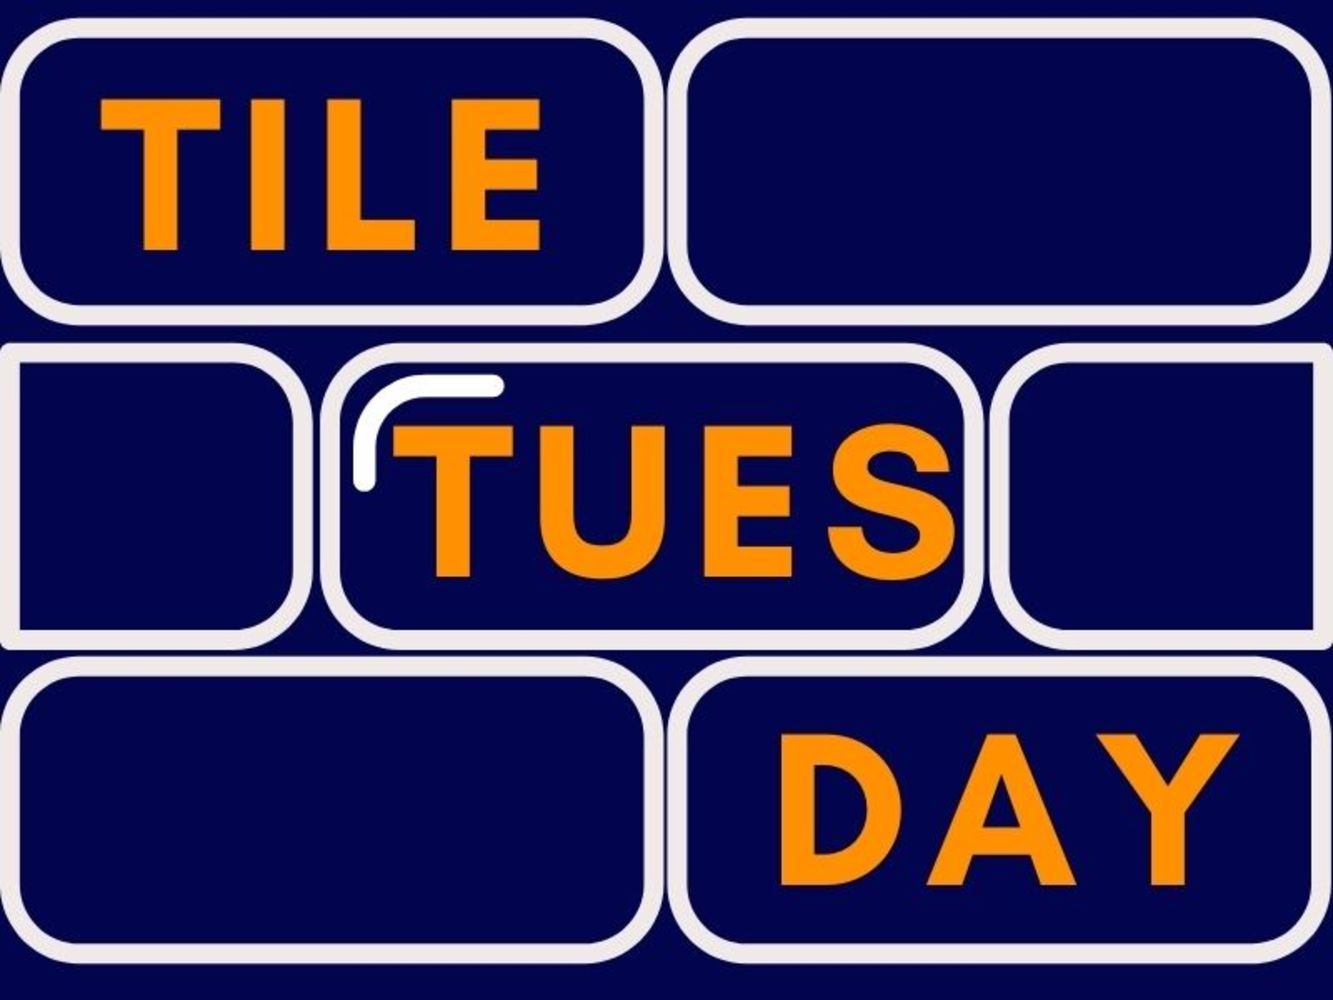 No Reserve - Tile Tuesday - “over £80k worth of tiles – Sourced from Johnsons Tiles” - 4th May 2021